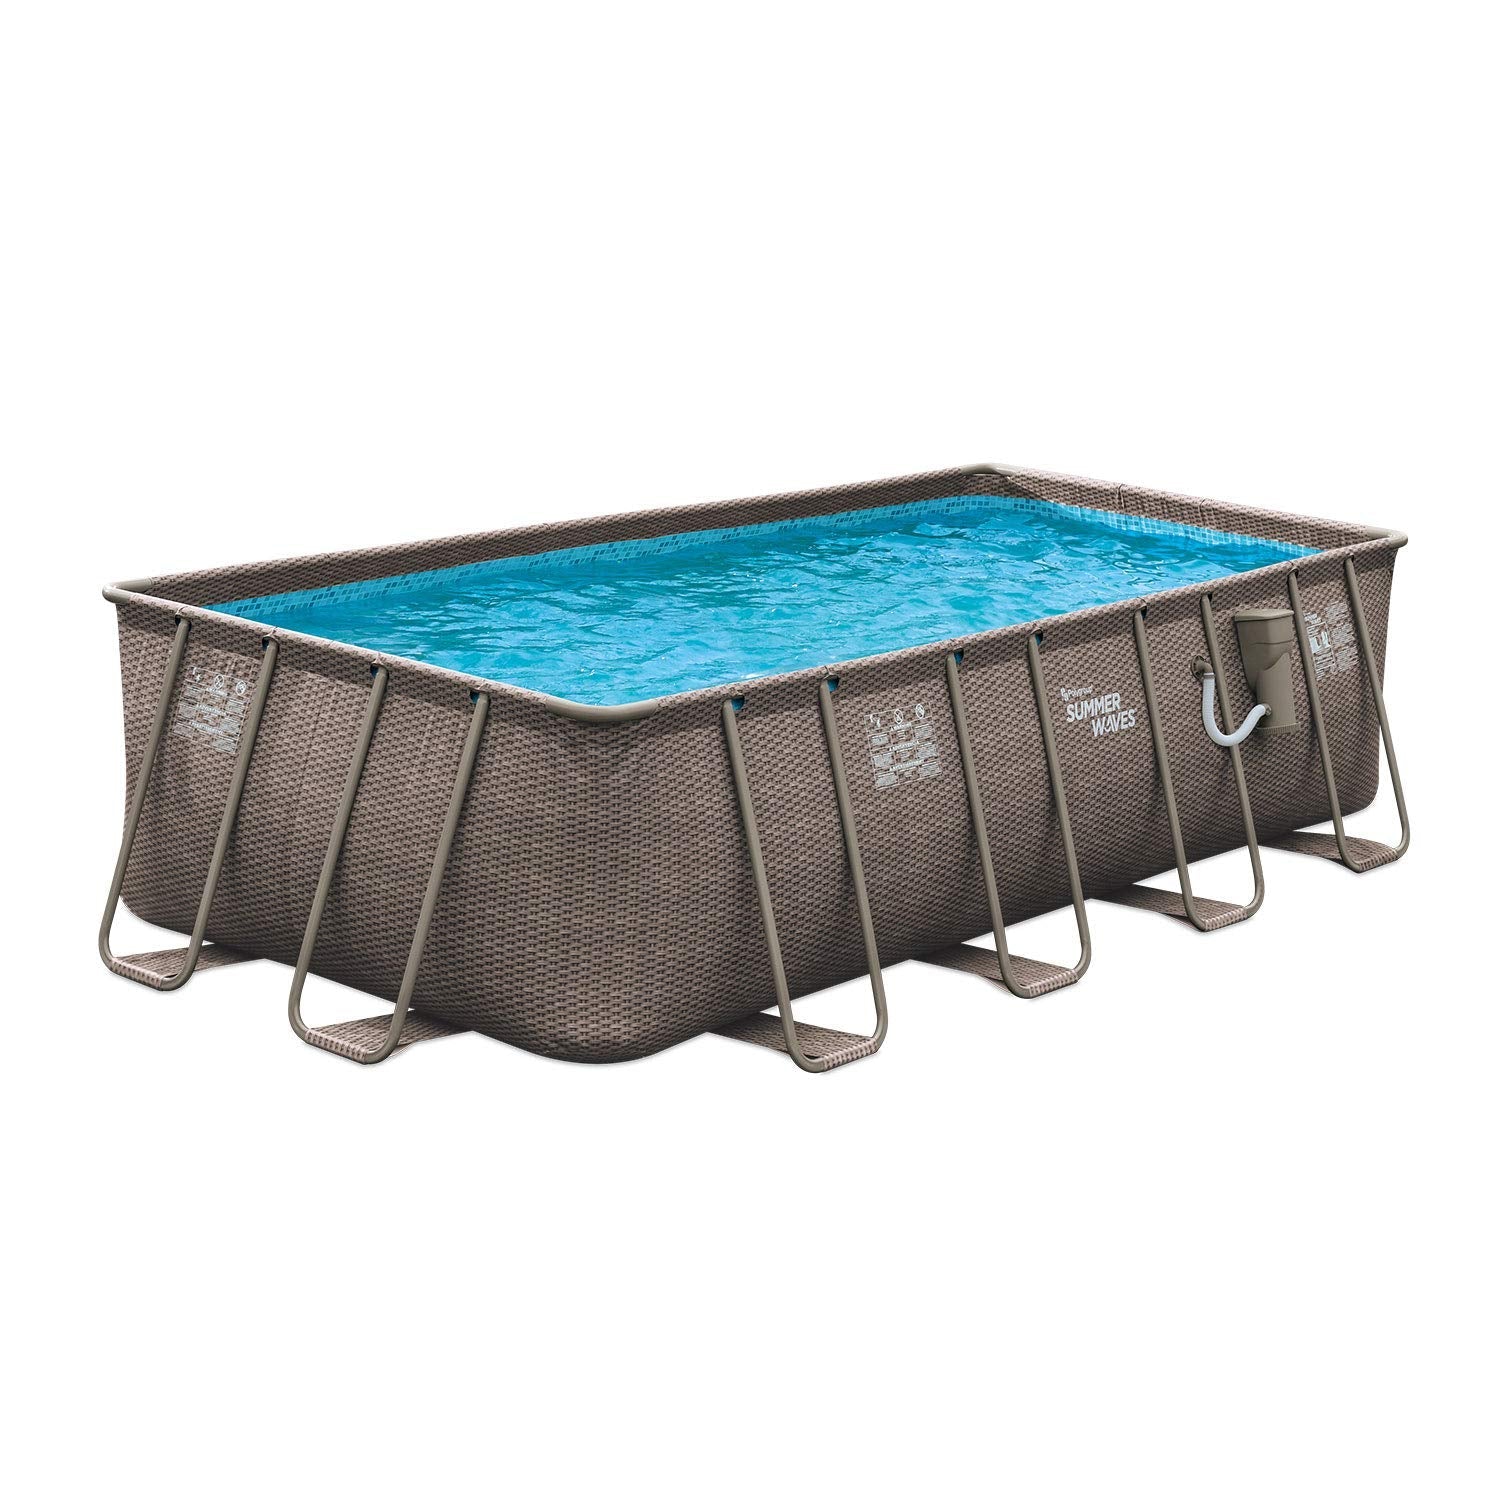 Summer Waves 18 Foot x 9 Foot x 52 Inch Above Ground Outdoor Rectangle Frame Swimming Pool Set